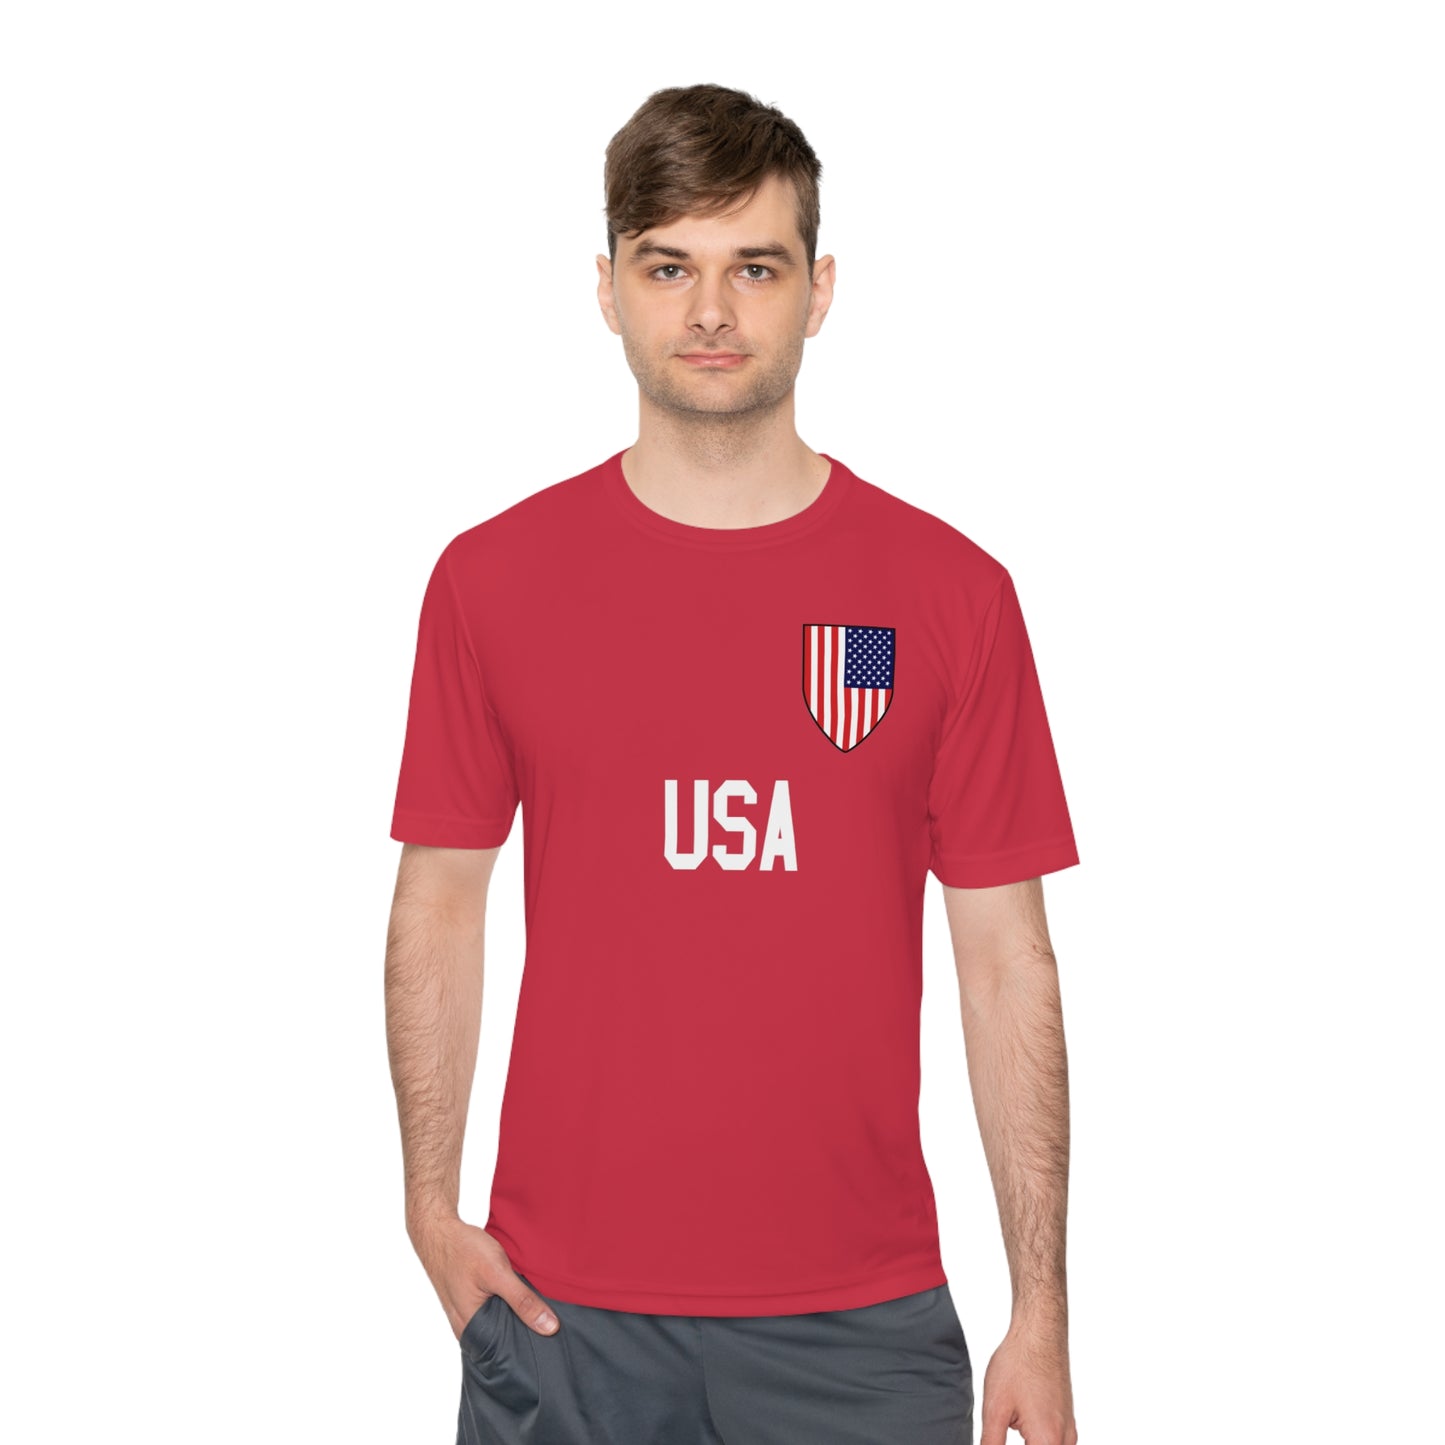 USA Soccer t-shirt with Soccer Shield USA Flag design and USA in block lettering